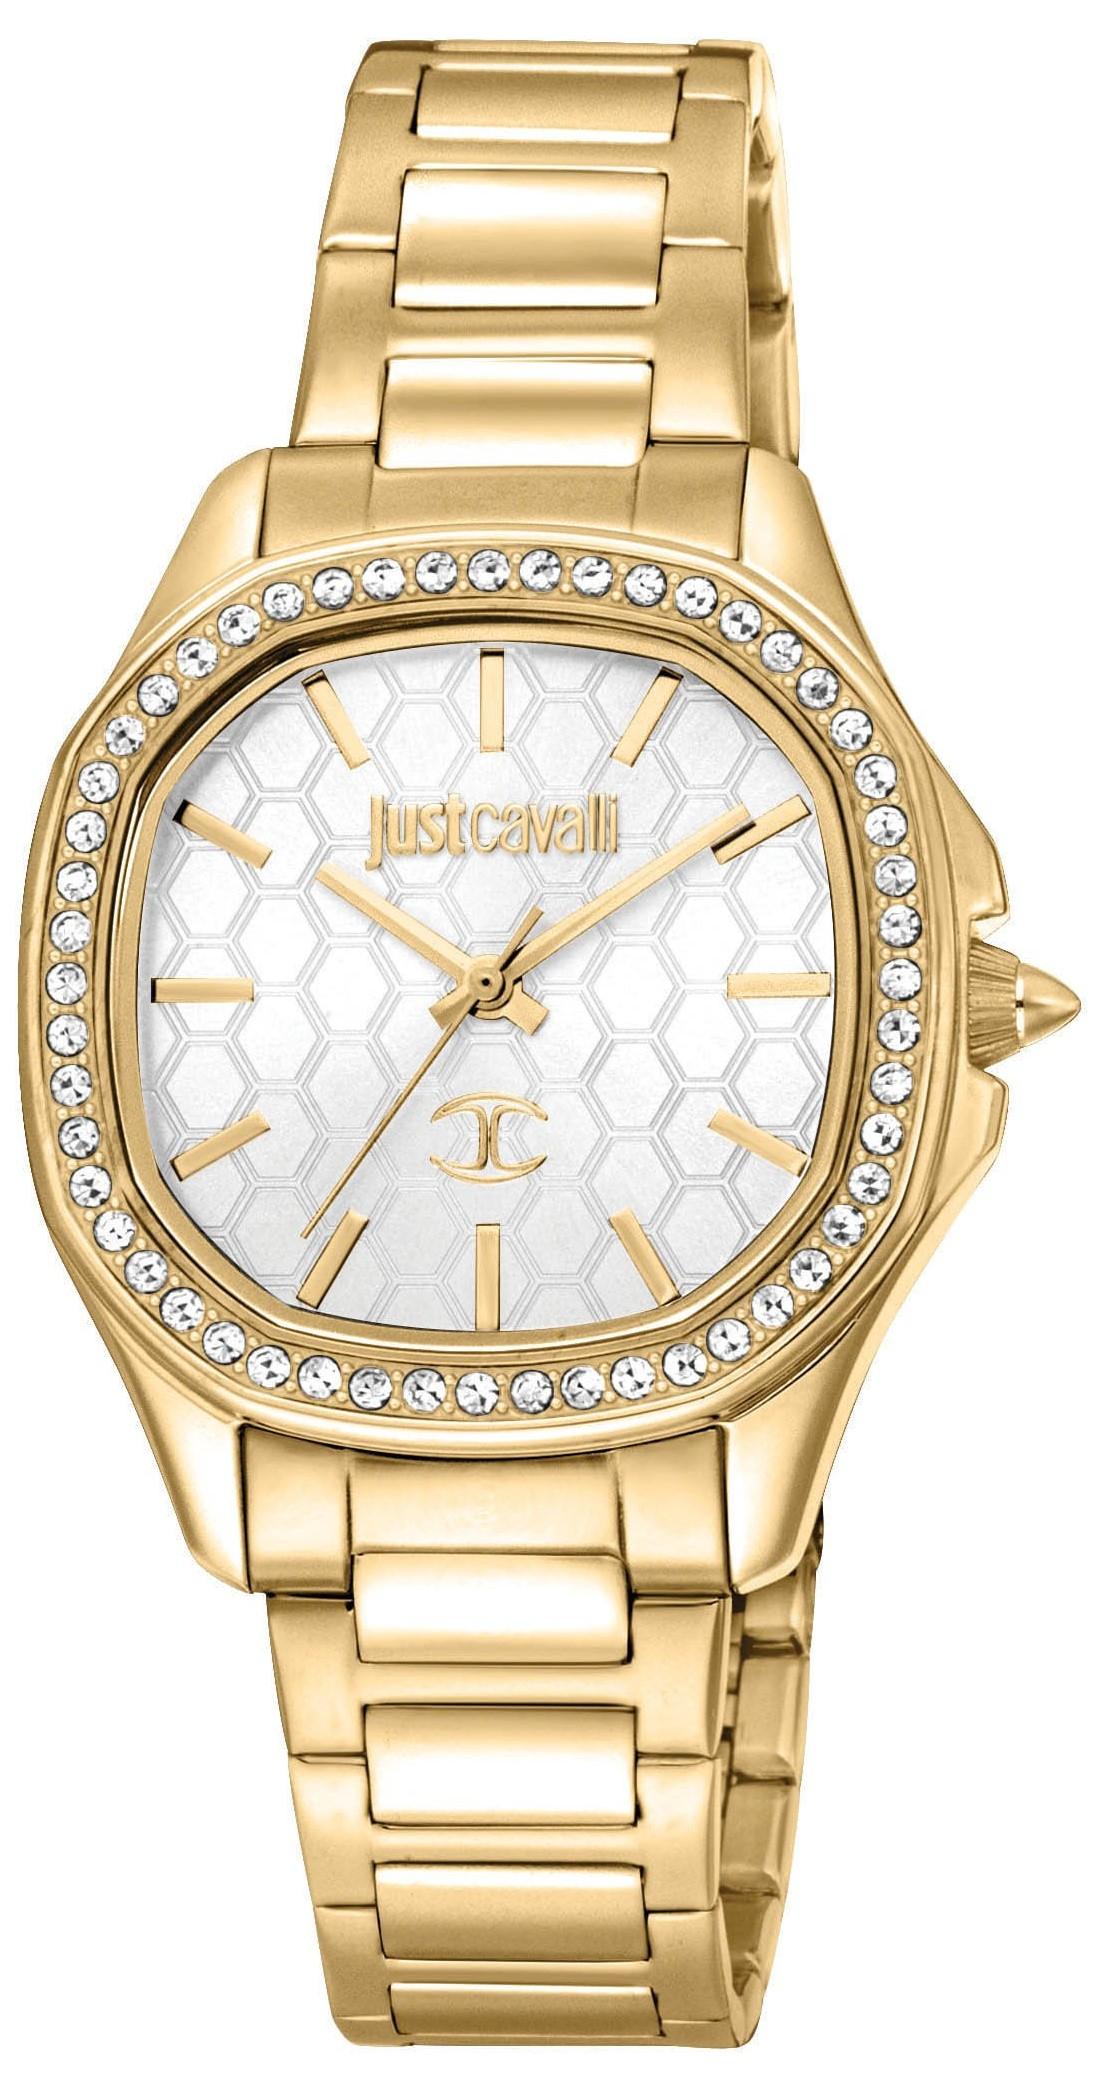 JUST CAVALLI Quadro - JC1L263M0055, Gold case with Stainless Steel Bracelet